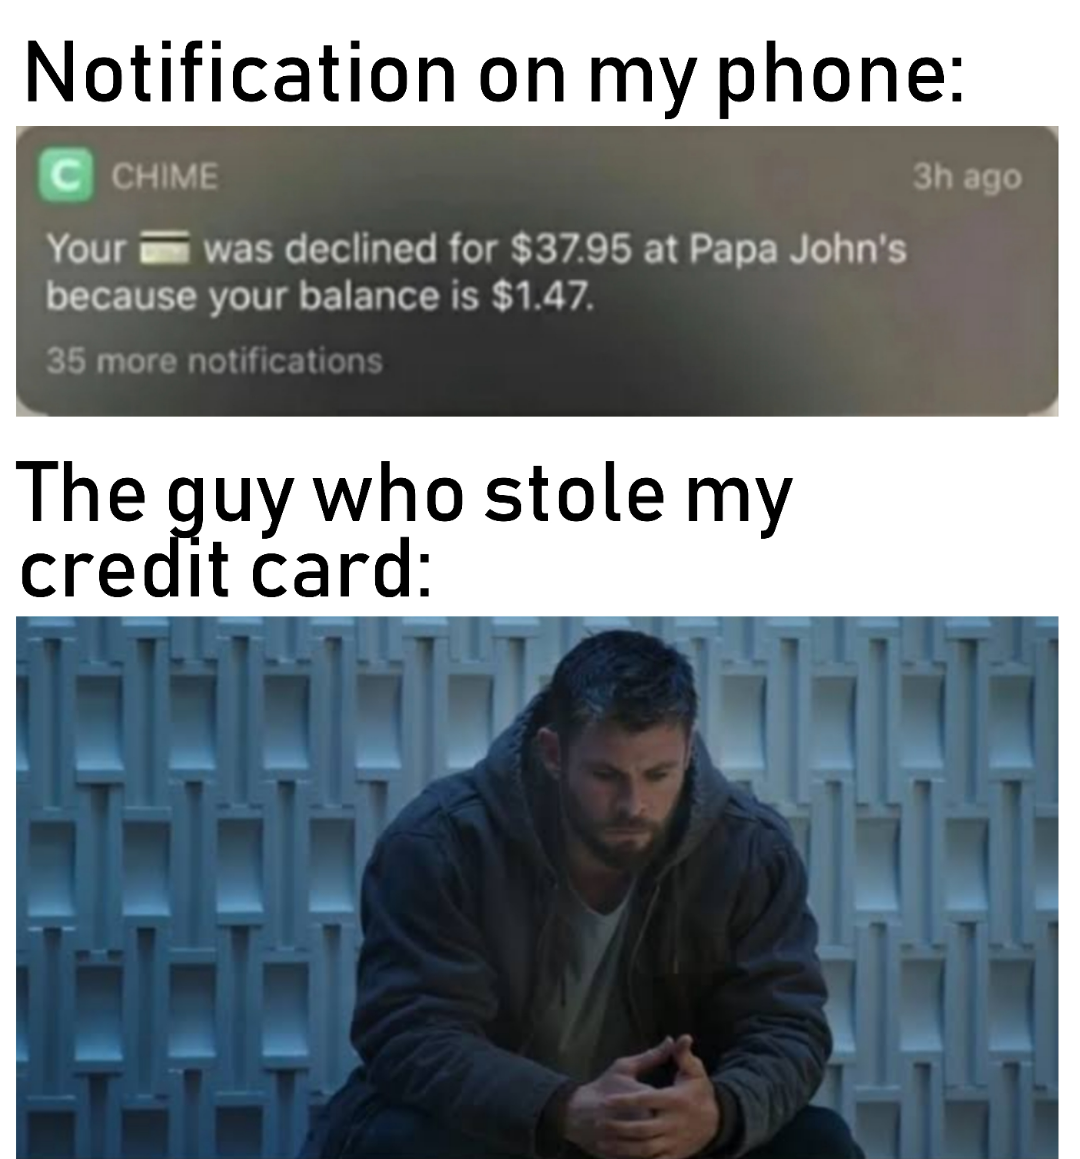 thor endgame trailer - Notification on my phone Chime Your was declined for $37.95 at Papa John's because your balance is $1.47. 35 more notifications The guy who stole my credit card 3h ago 11